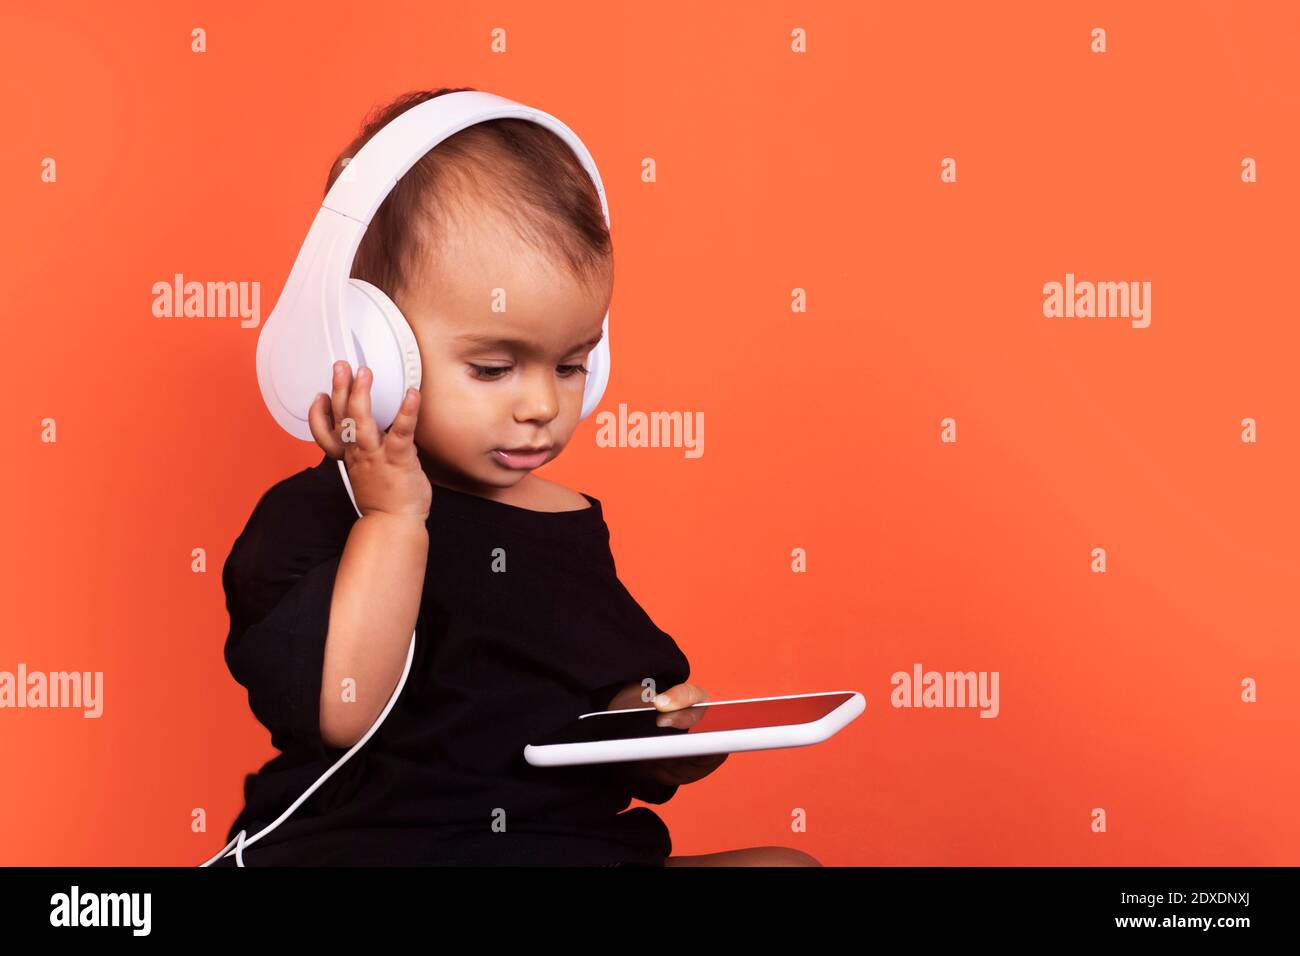 Cute baby girl wearing headphones using mobile phone while sitting against orange background Stock Photo